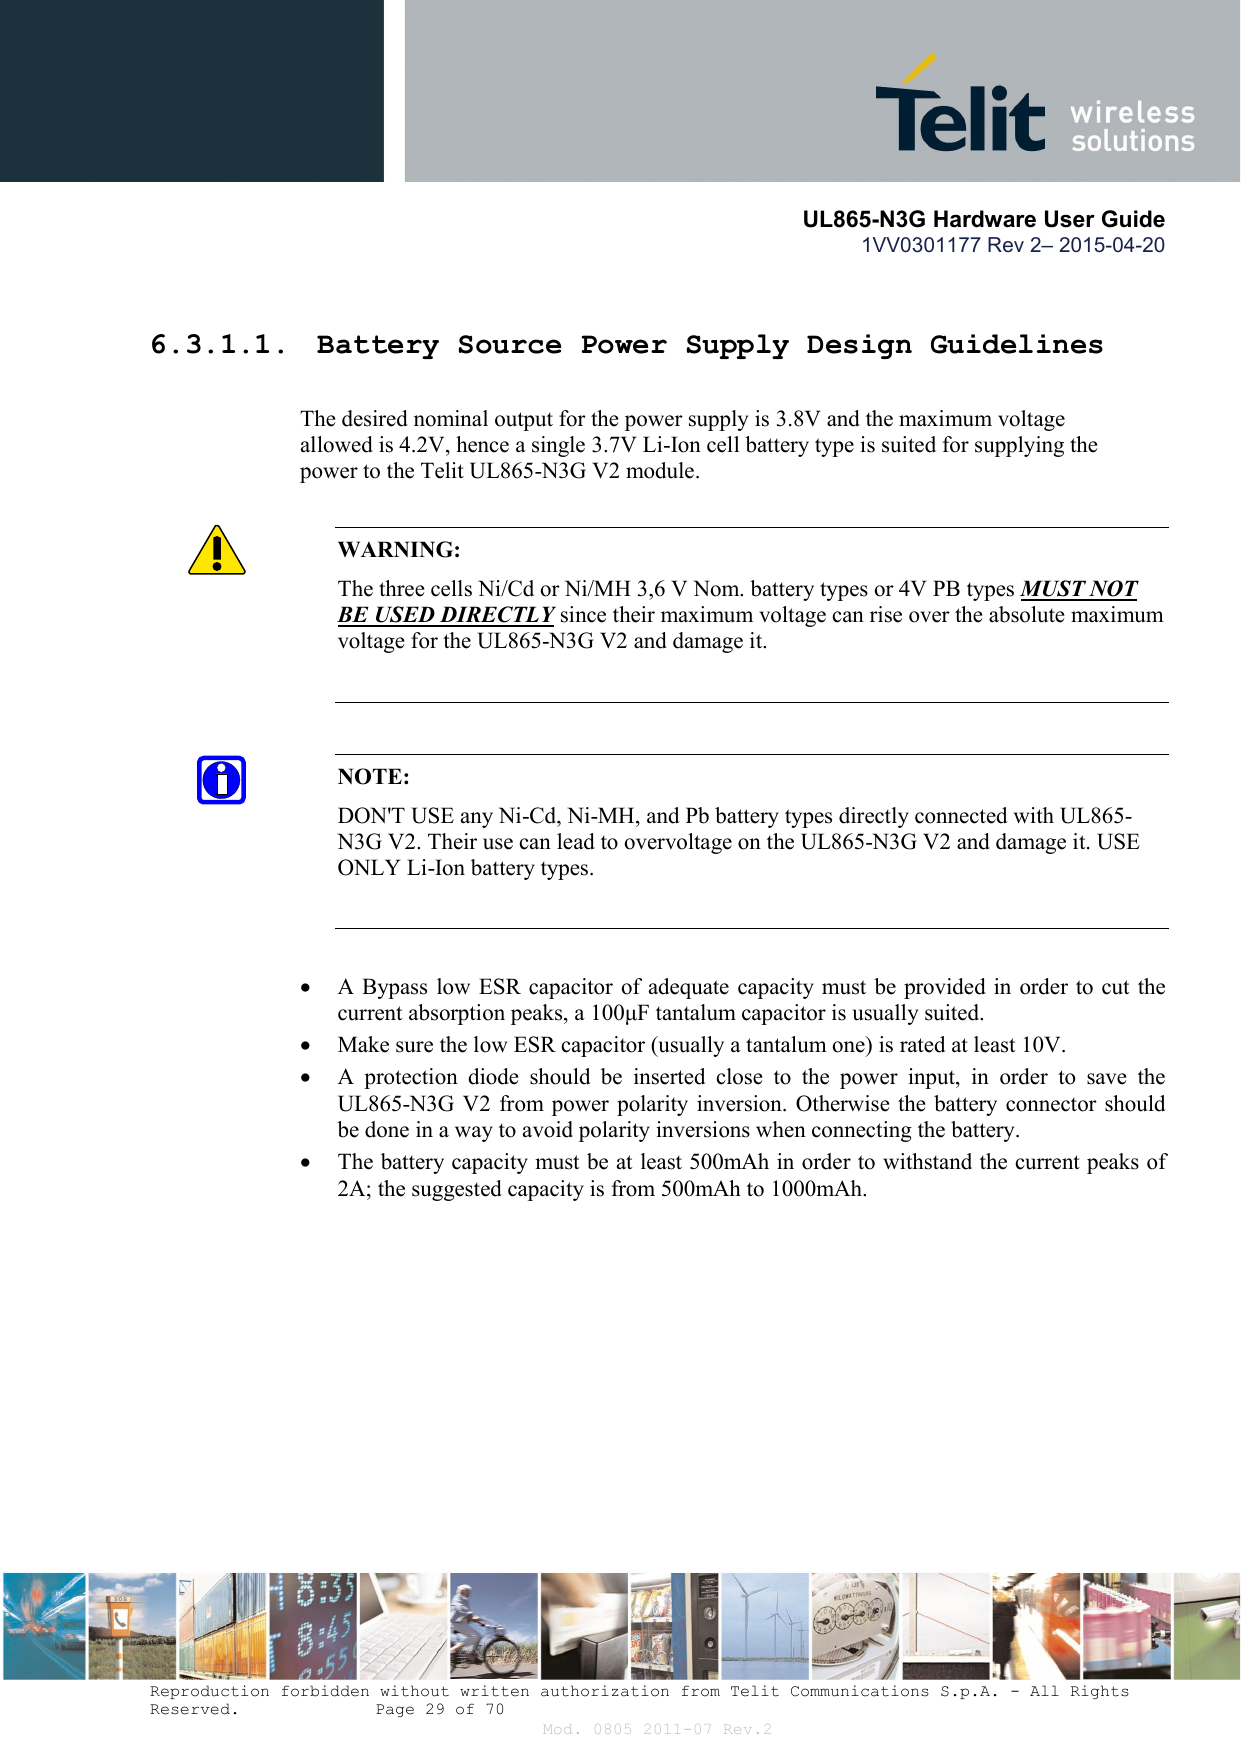       UL865-N3G Hardware User Guide 1VV0301177 Rev 2– 2015-04-20  Reproduction forbidden without written authorization from Telit Communications S.p.A. - All Rights Reserved.    Page 29 of 70 Mod. 0805 2011-07 Rev.2  6.3.1.1.  Battery Source Power Supply Design Guidelines        The desired nominal output for the power supply is 3.8V and the maximum voltage      allowed is 4.2V, hence a single 3.7V Li-Ion cell battery type is suited for supplying the      power to the Telit UL865-N3G V2 module.  WARNING: The three cells Ni/Cd or Ni/MH 3,6 V Nom. battery types or 4V PB types MUST NOT BE USED DIRECTLY since their maximum voltage can rise over the absolute maximum voltage for the UL865-N3G V2 and damage it.   NOTE: DON&apos;T USE any Ni-Cd, Ni-MH, and Pb battery types directly connected with UL865-N3G V2. Their use can lead to overvoltage on the UL865-N3G V2 and damage it. USE ONLY Li-Ion battery types.    A Bypass low ESR capacitor of adequate capacity must be provided in order to cut the current absorption peaks, a 100μF tantalum capacitor is usually suited.  Make sure the low ESR capacitor (usually a tantalum one) is rated at least 10V.  A  protection  diode  should  be  inserted  close  to  the  power  input,  in  order  to  save  the UL865-N3G V2  from power  polarity inversion. Otherwise the  battery connector  should be done in a way to avoid polarity inversions when connecting the battery.  The battery capacity must be at least 500mAh in order to withstand the current peaks of 2A; the suggested capacity is from 500mAh to 1000mAh. 